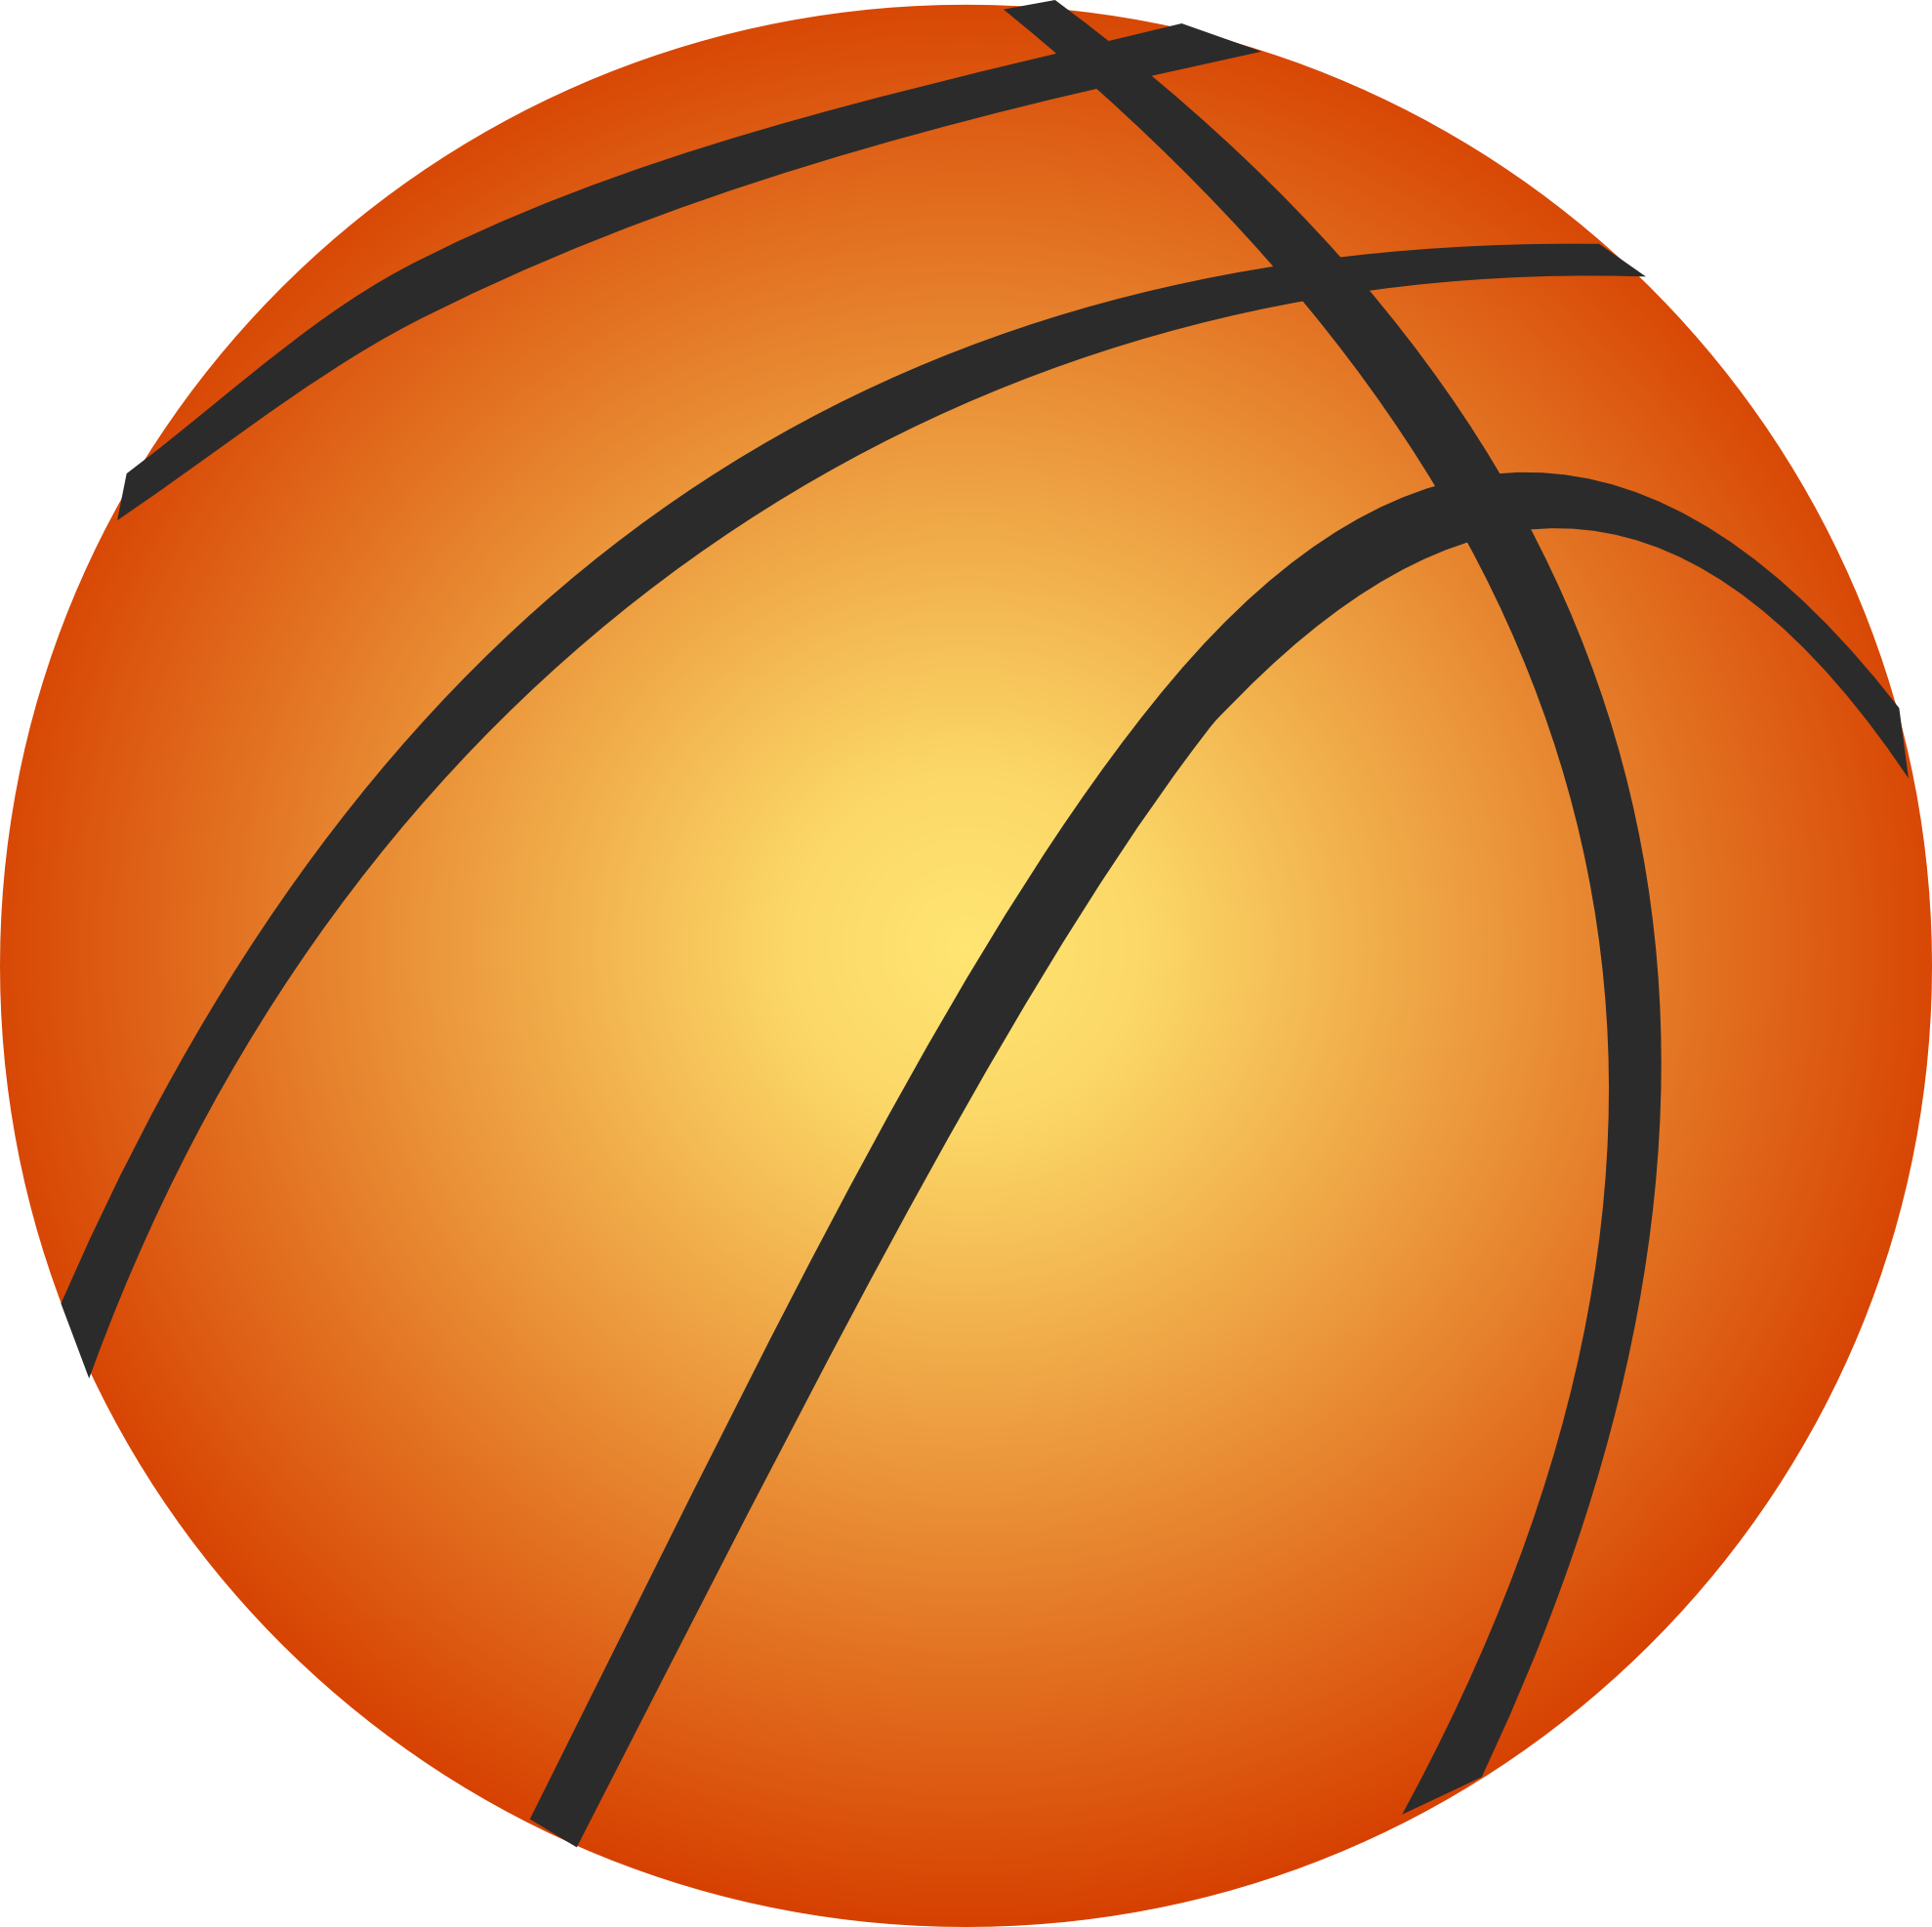 Basketball ball PNG images, free download